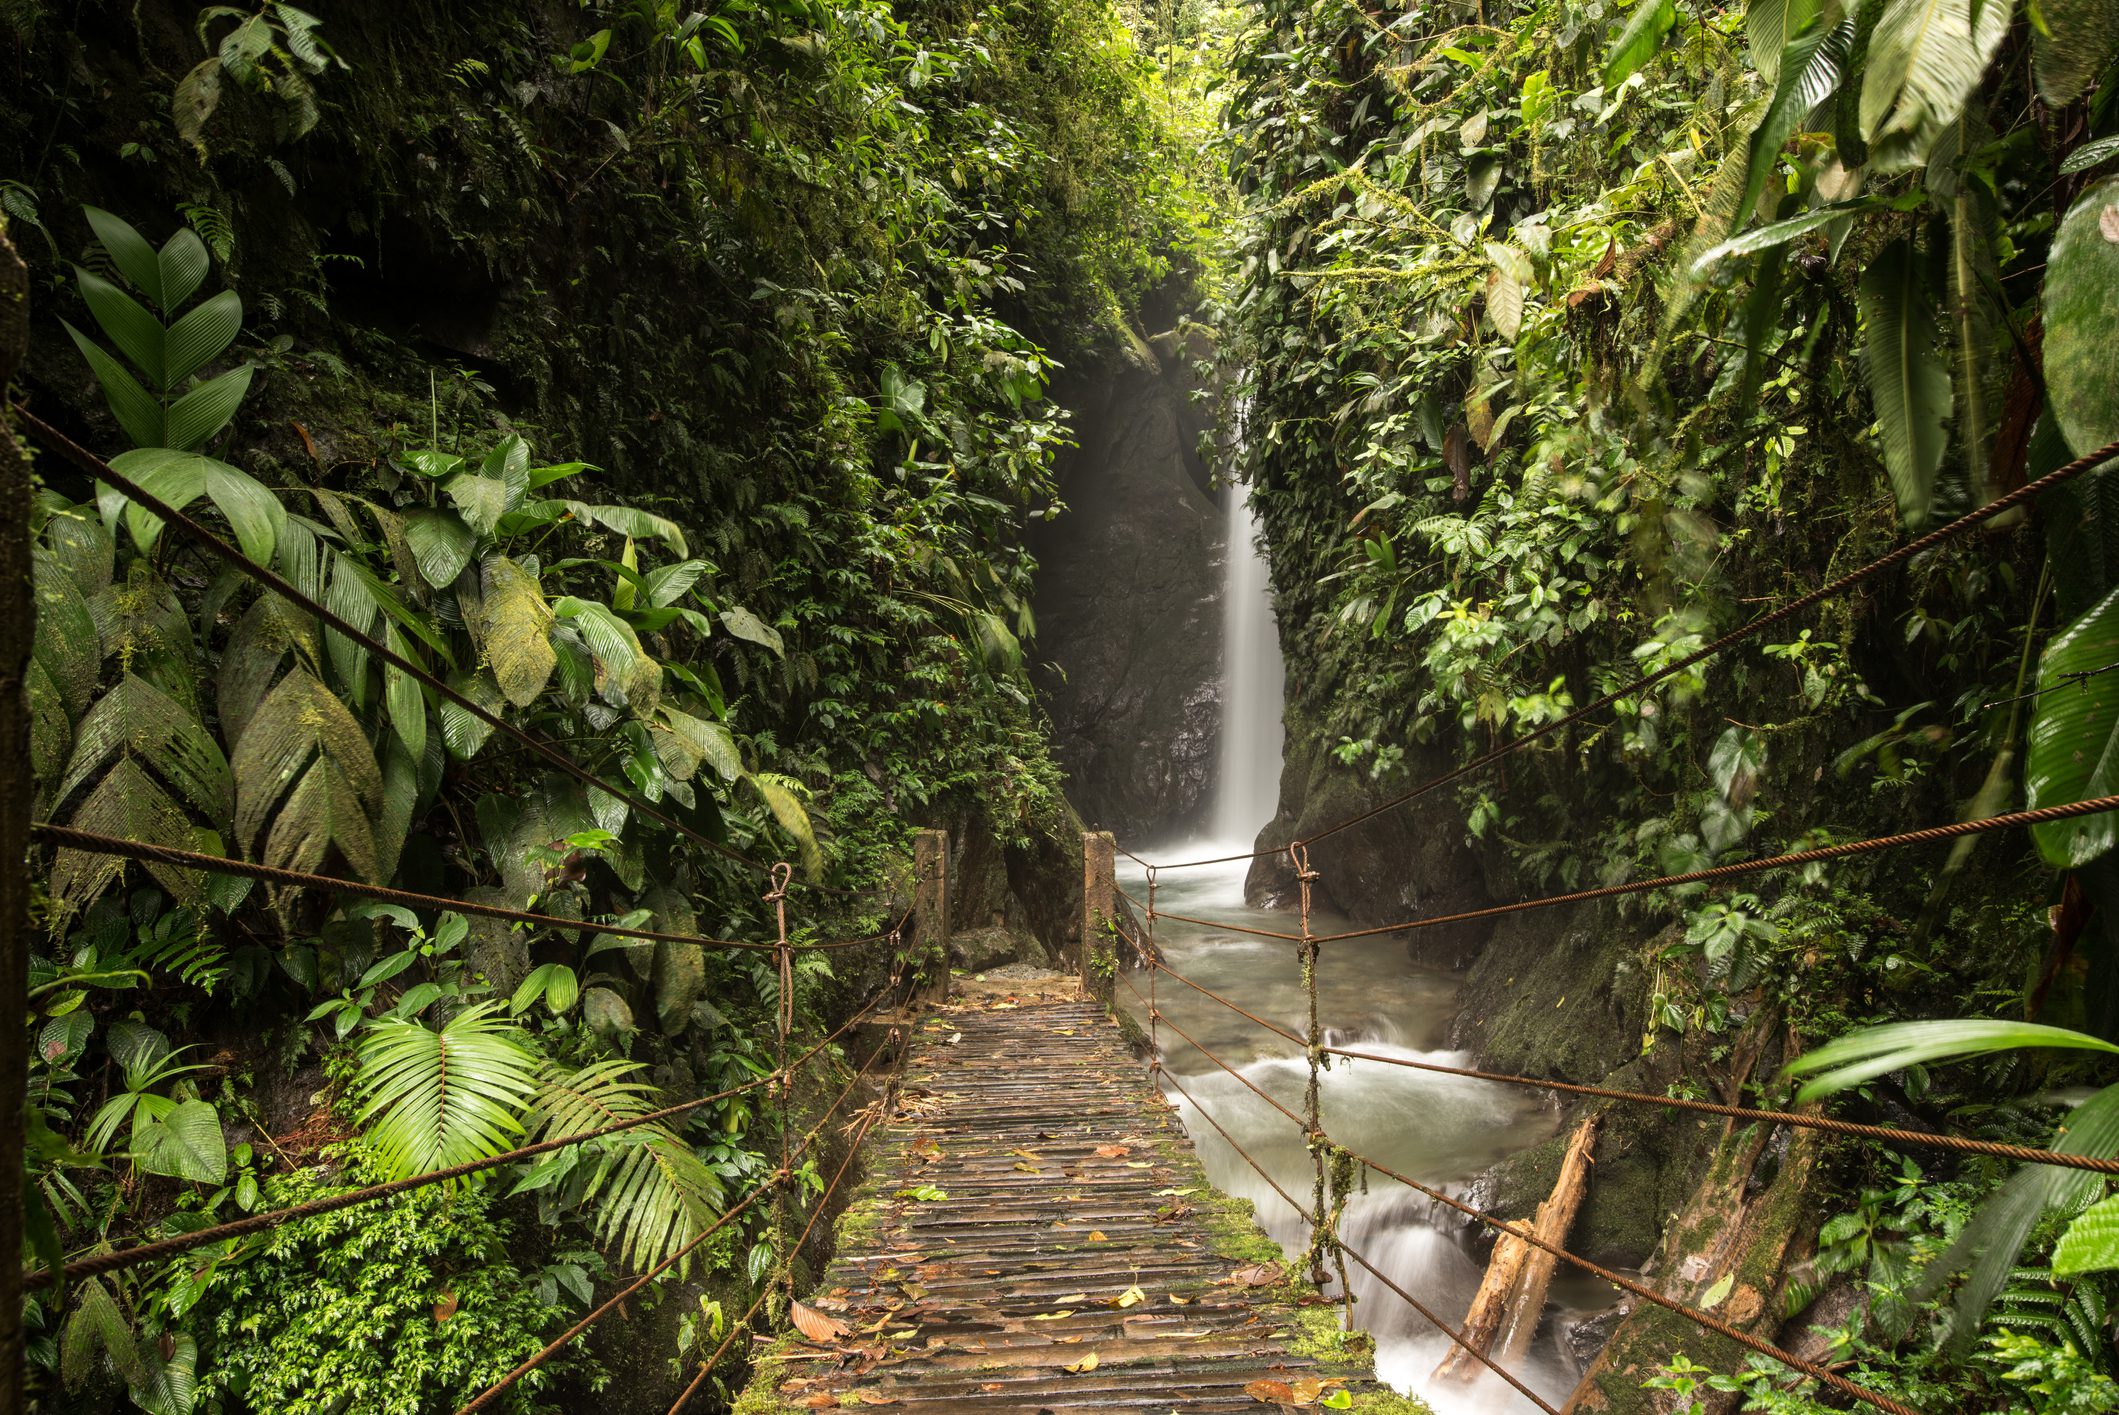 Waterfalls of the tropical rainforest in Mindo, Ecuador